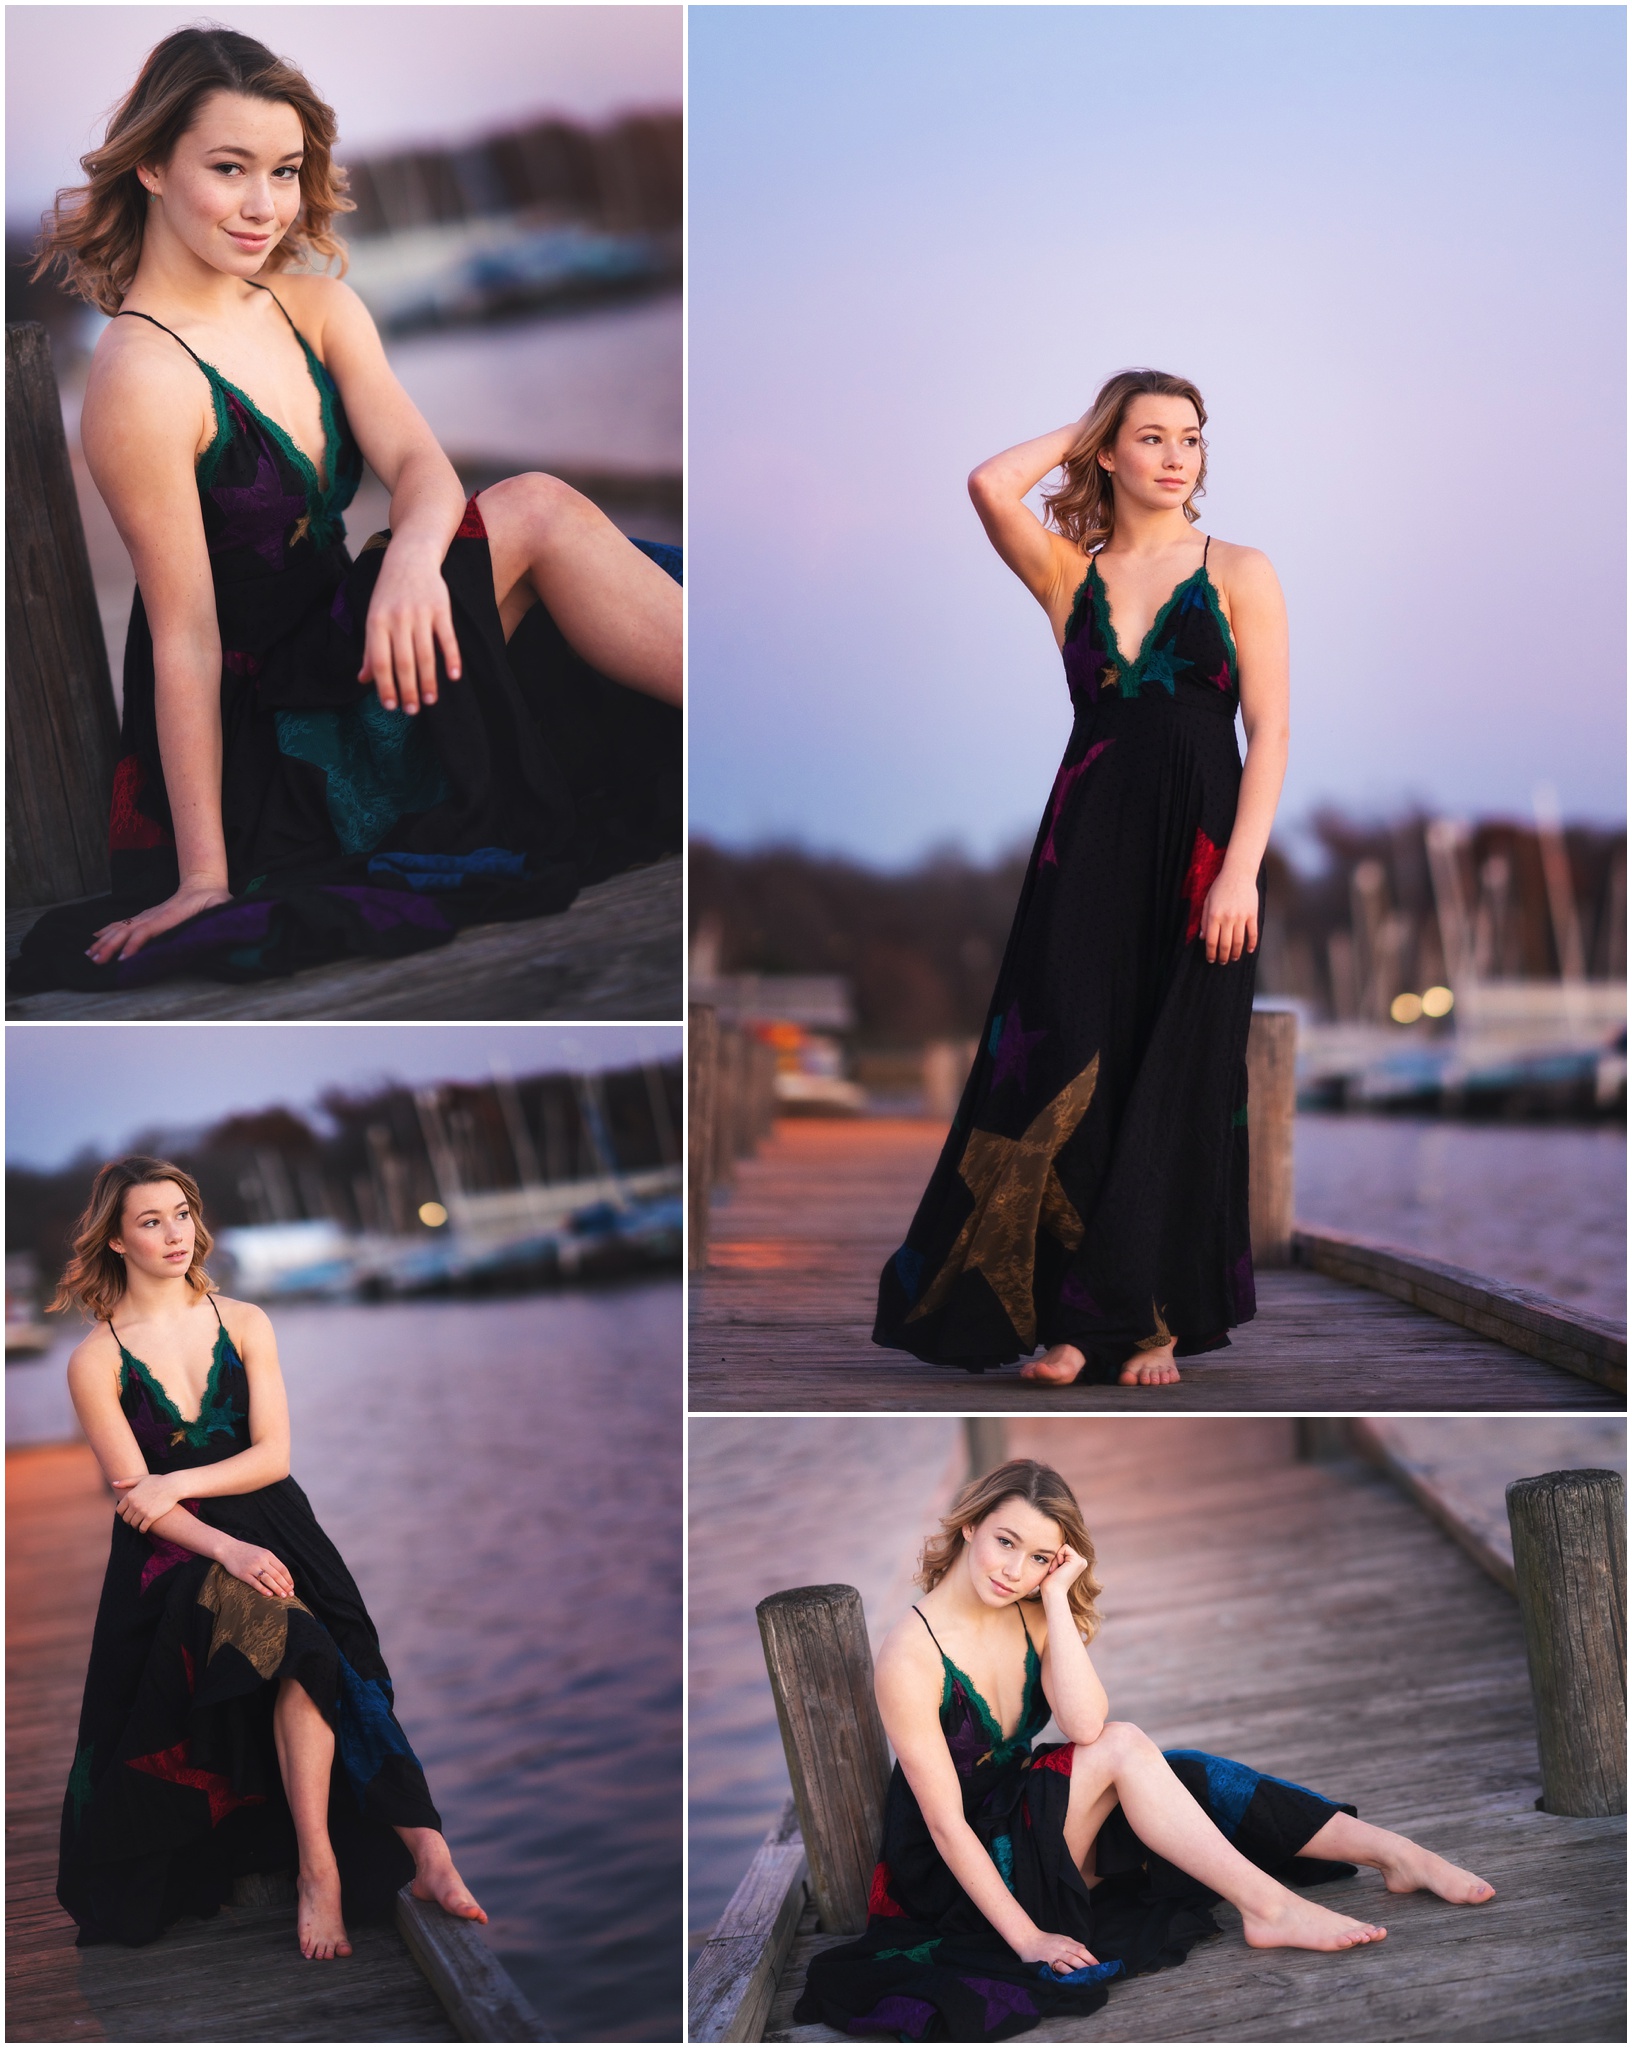 Ava Noble in STAR dress at white rock lake during sunset